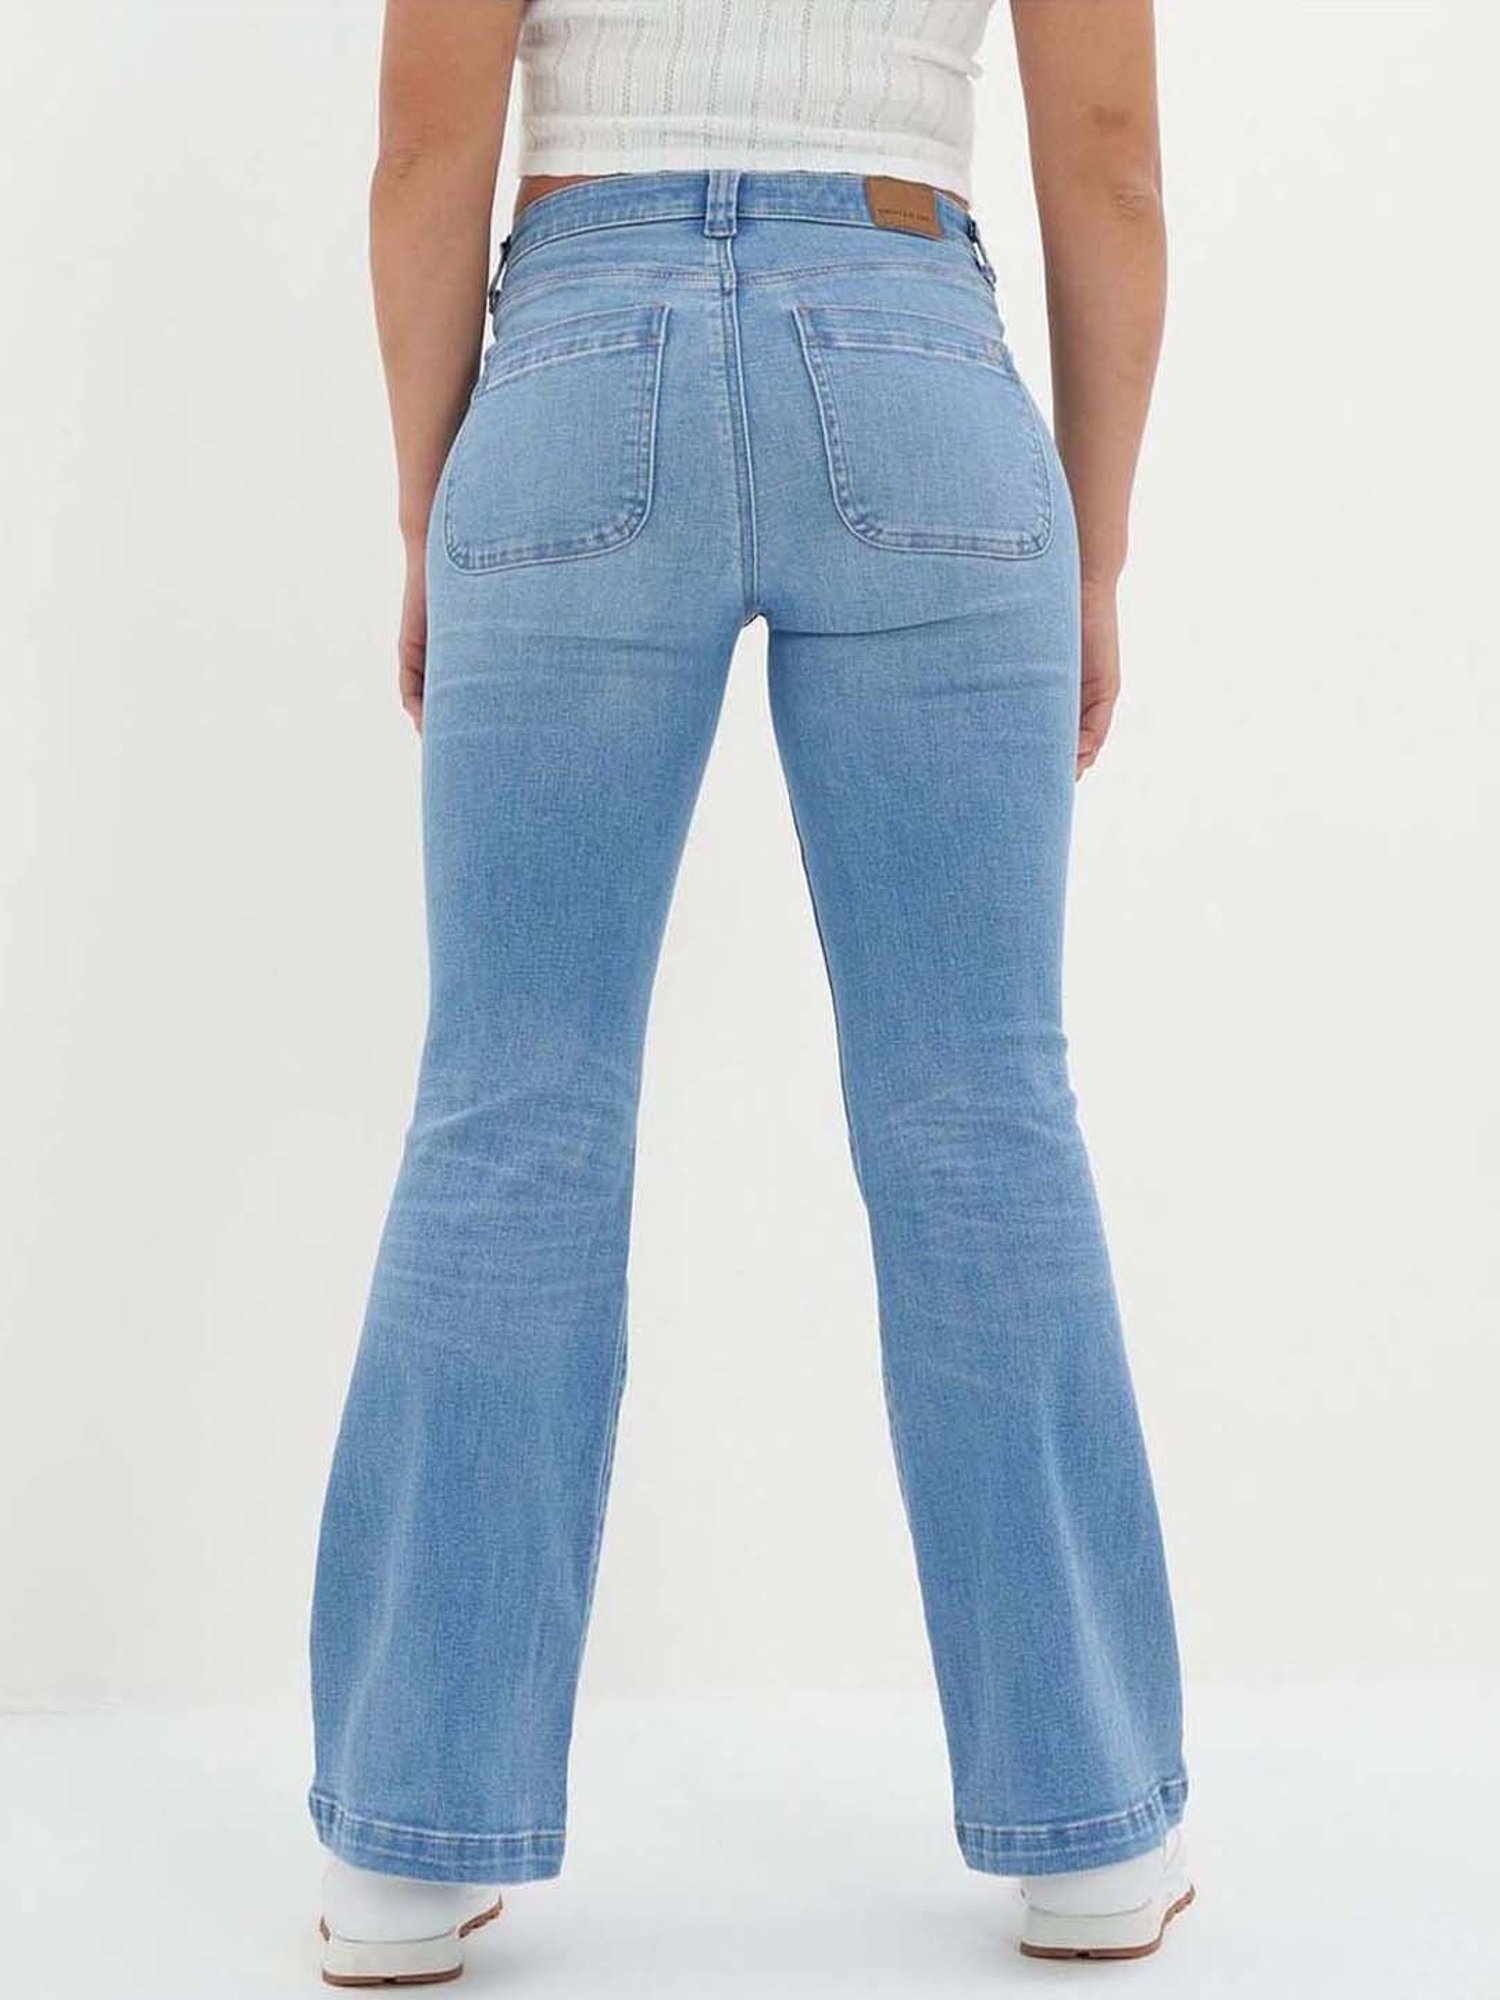 American Eagle Outfitters Blue Cotton Mid Rise Jeans